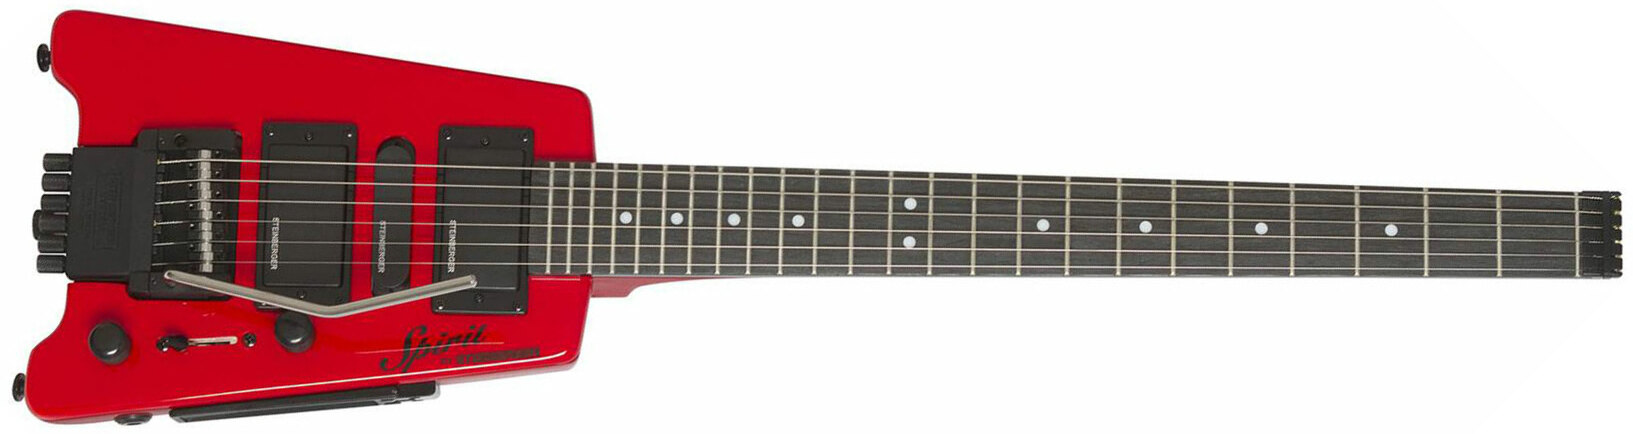 Steinberger Gt-pro Deluxe Outfit Hsh Trem Rw +housse - Hot Rod Red - Guitare Électrique Voyage - Main picture